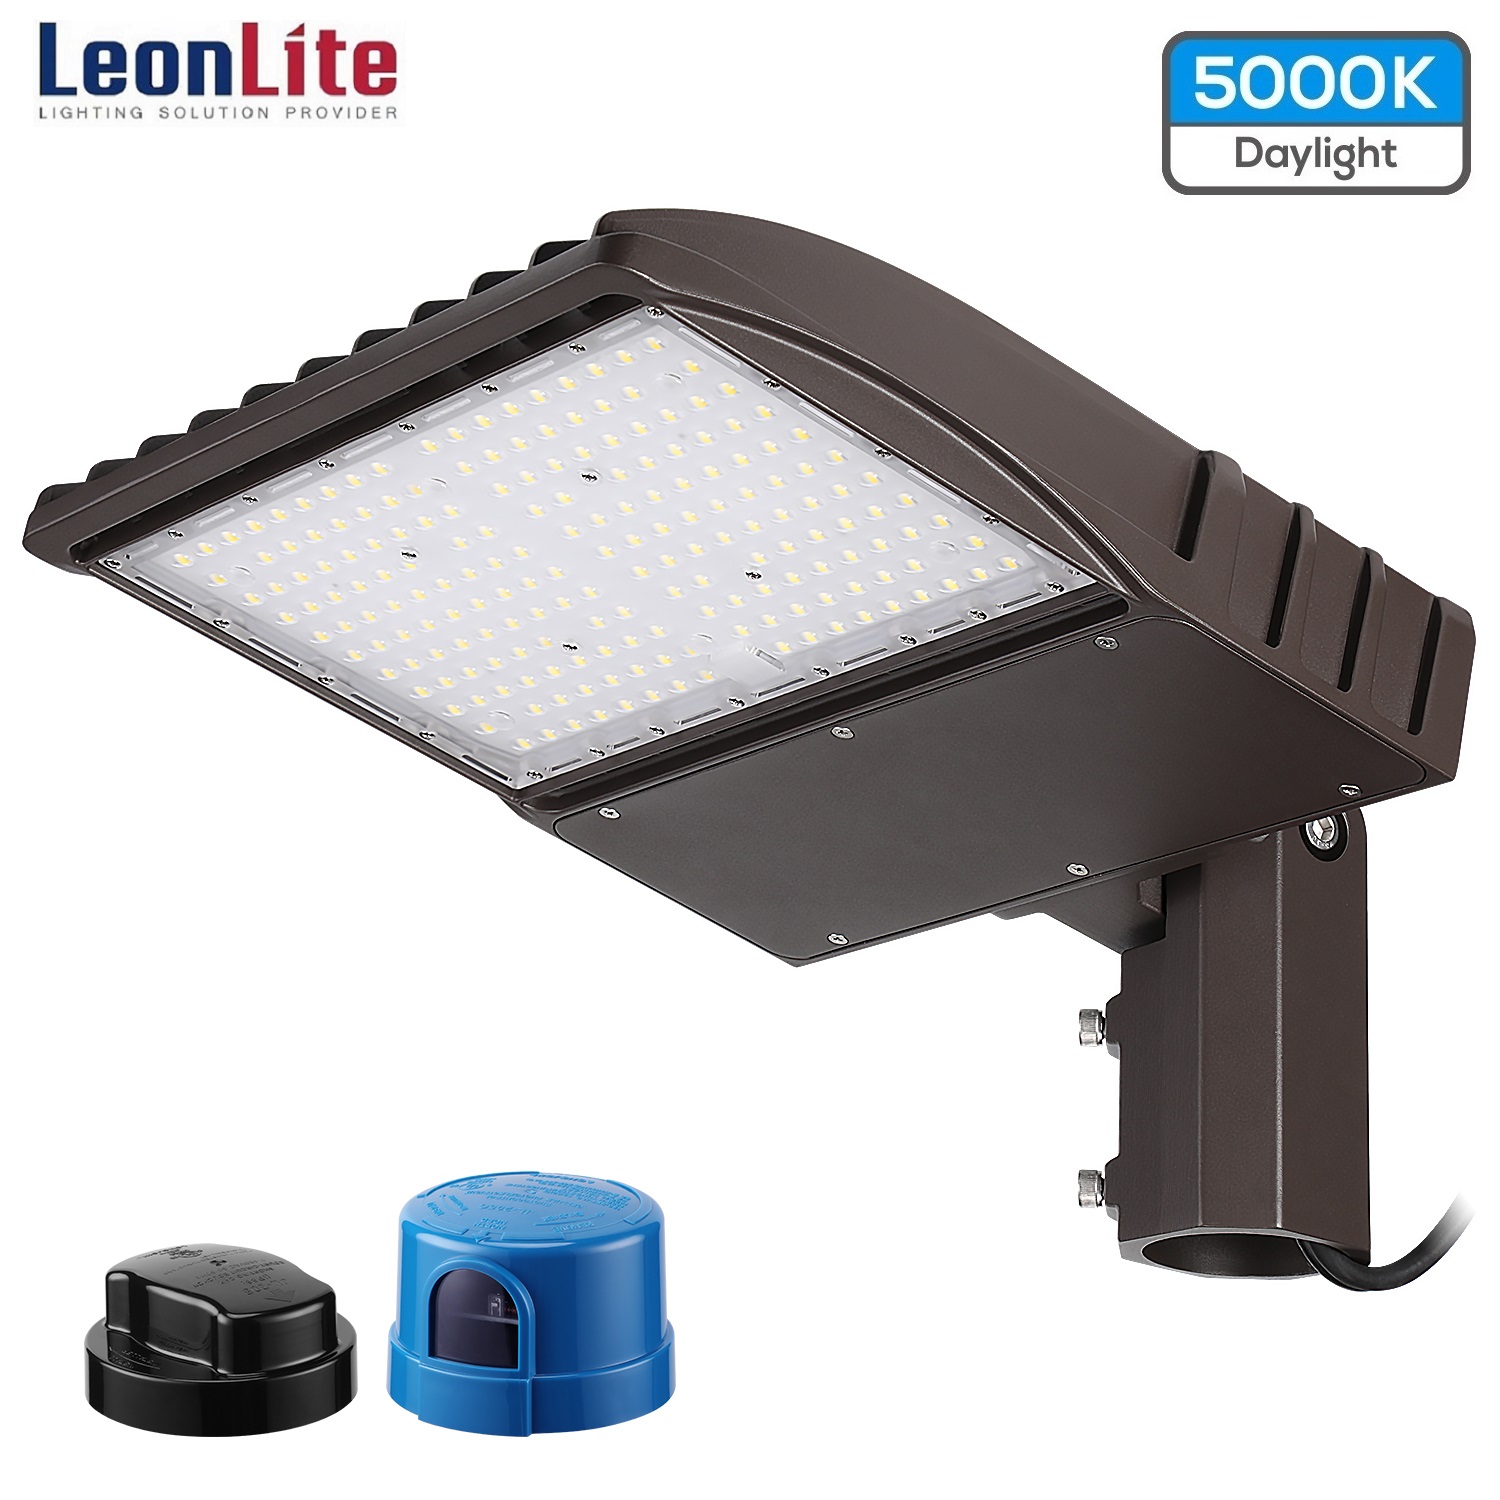 LEONLITE 150W LED Parking Lot Light, UL Listed Dusk to Dawn Area Light with Photocell, IP65 Waterproof Slipfitter Mount Shoebox, 5000K Daylight for Driveway, Street, Playground, Shorting Cap Included - image 1 of 7